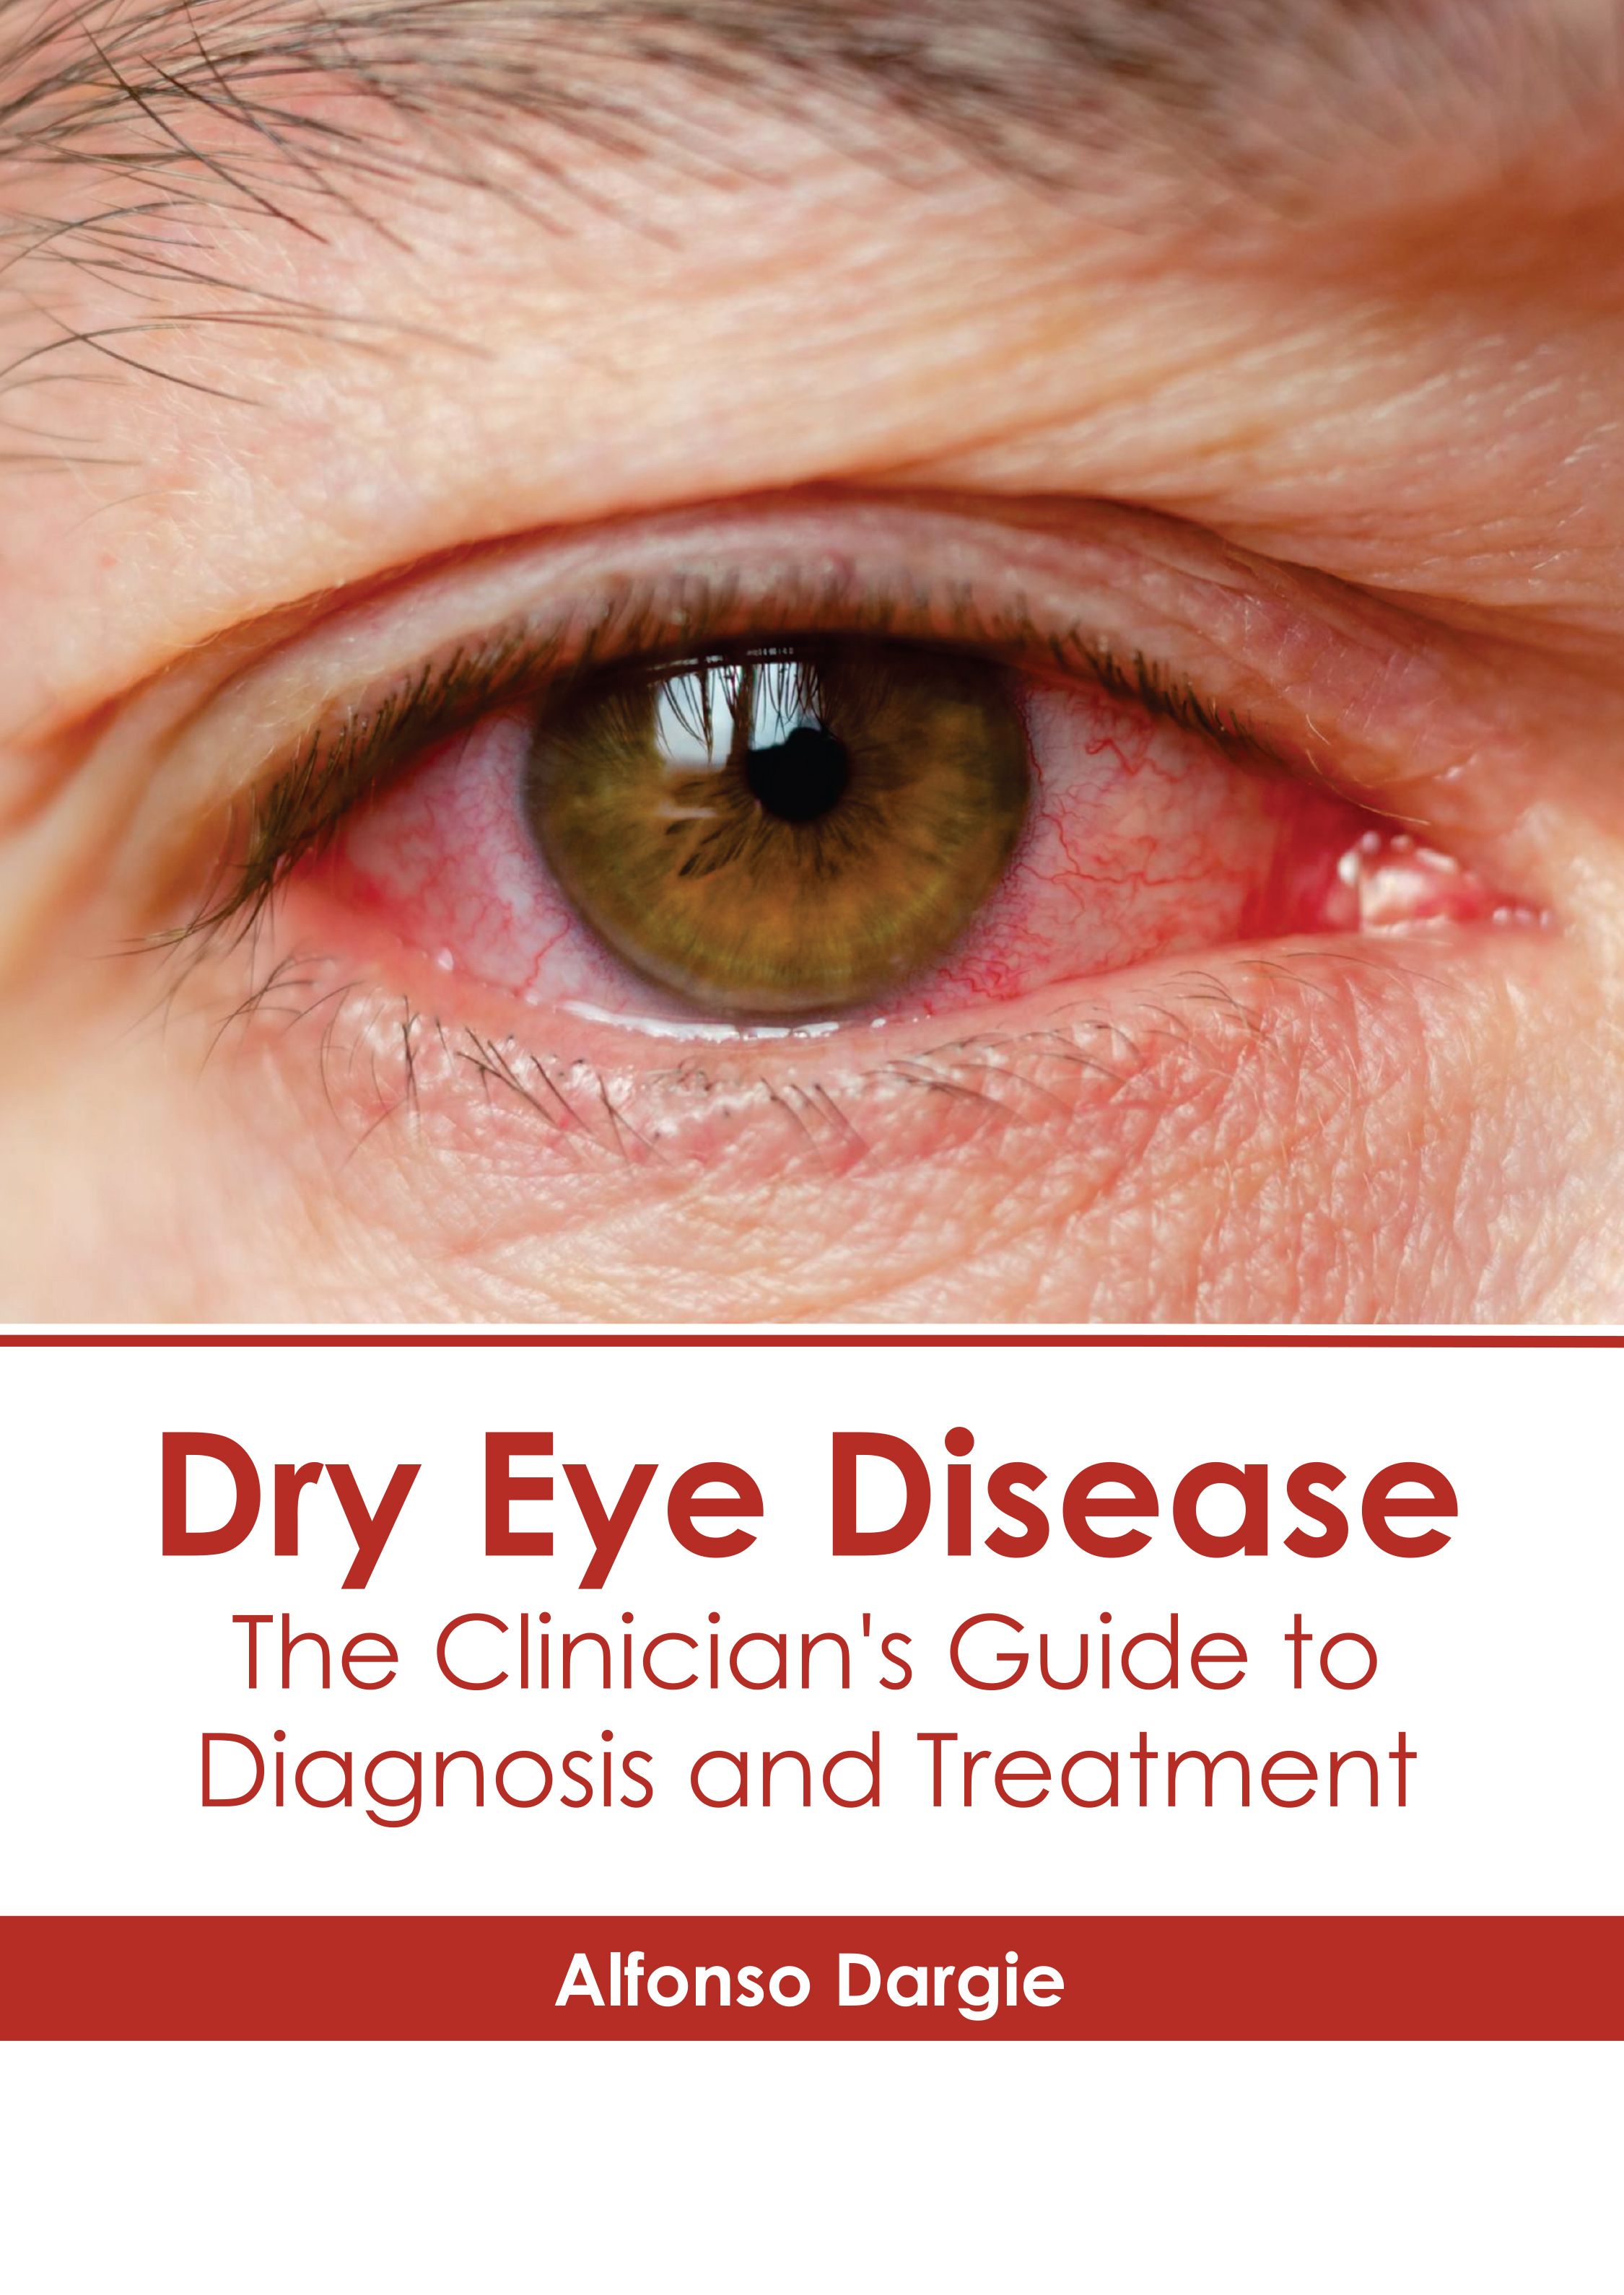 DRY EYE DISEASE: THE CLINICIAN'S GUIDE TO DIAGNOSIS AND TREATMENT